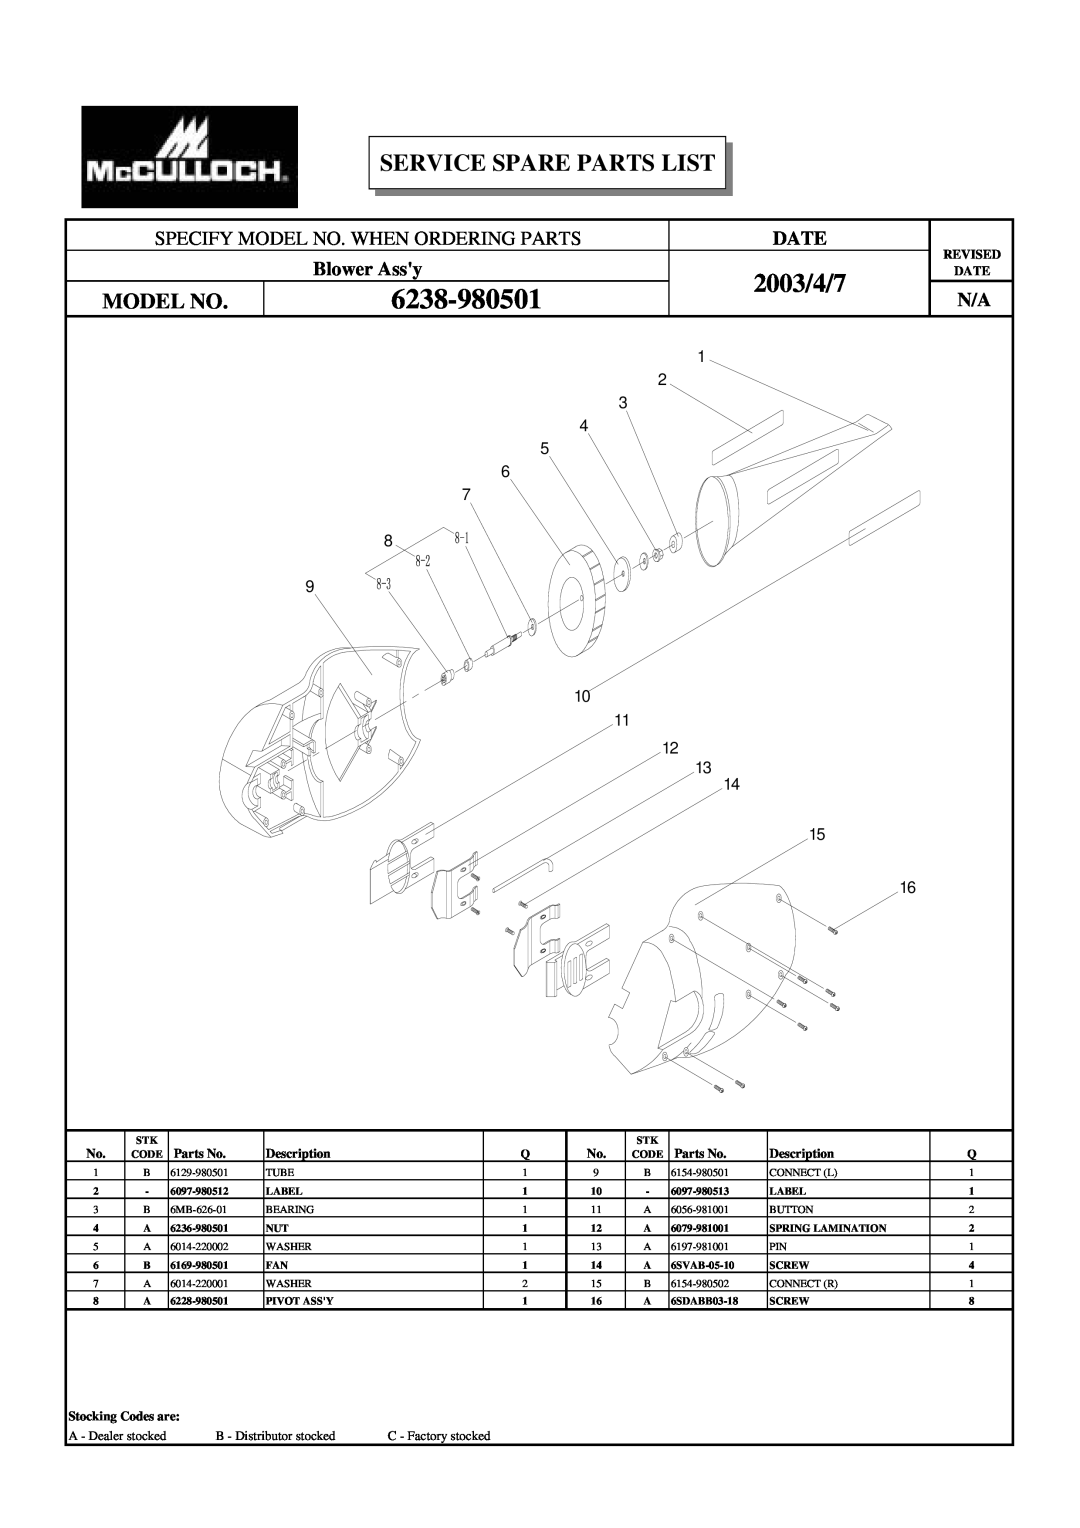 McCulloch MCM108B manual 6238-980501, 2003/4/7, Service Spare Parts List, Specify Model No. When Ordering Parts, Date 